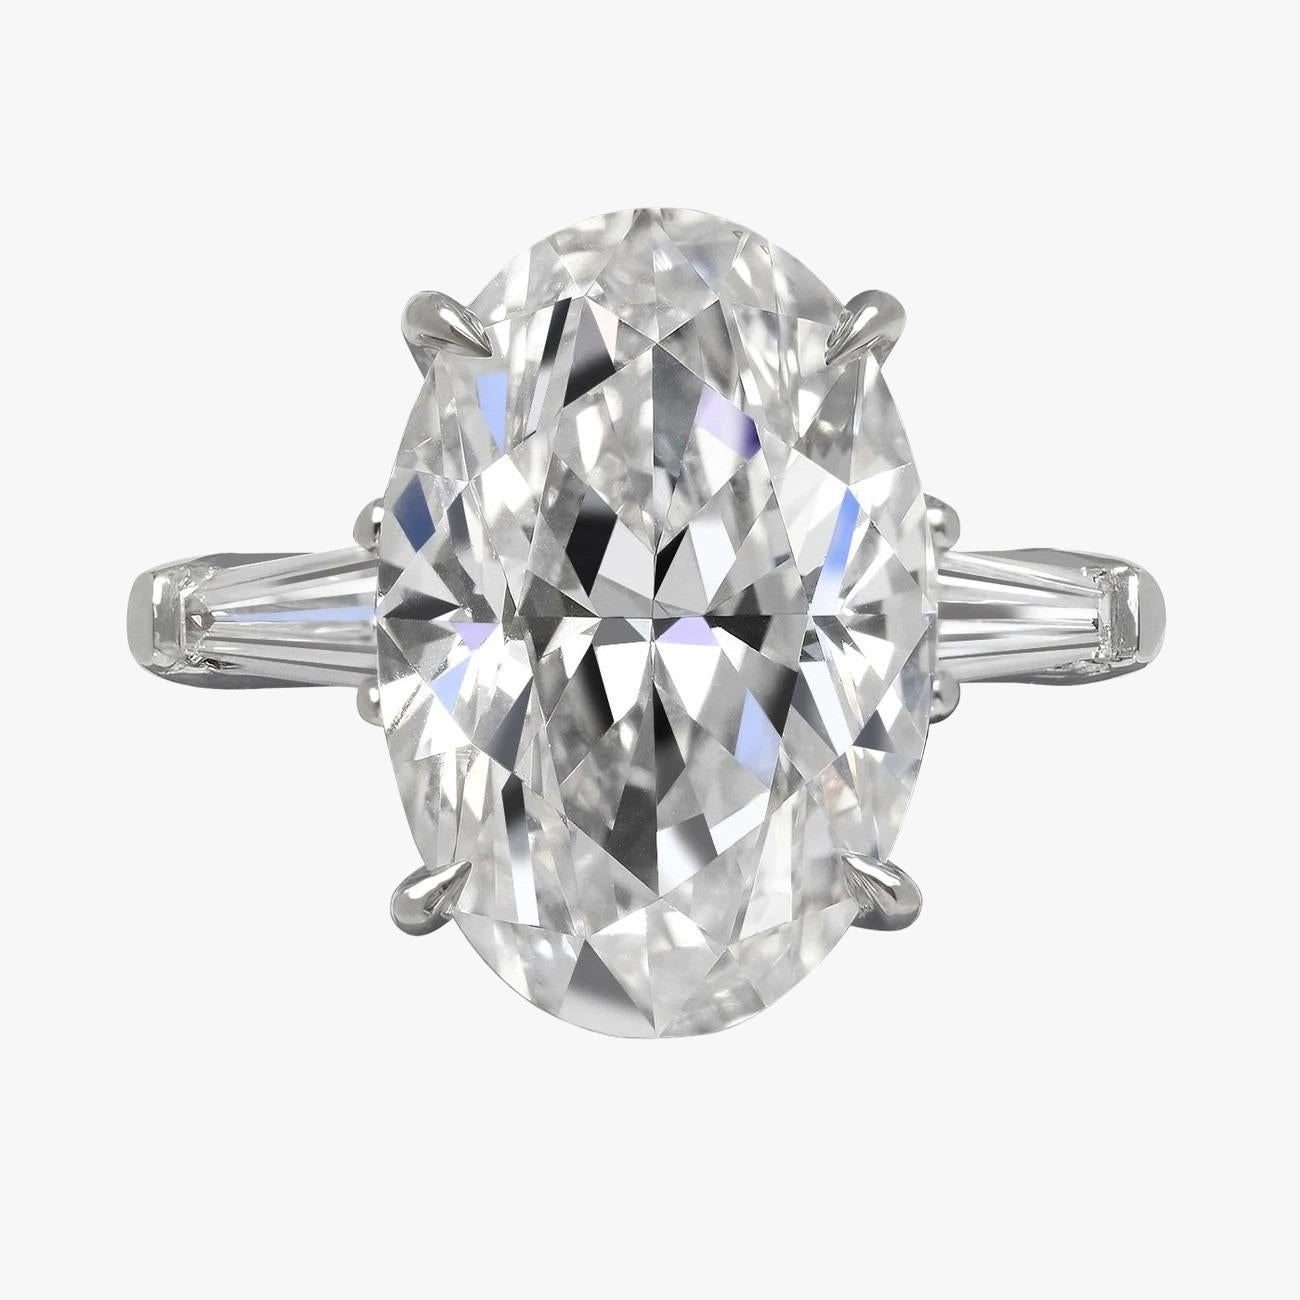 A classic from the italian jewerler Antinori di Sanpietro. An exceptional 3 -carat oval cut diamond

The gorgeous diamond is certified by the Gemological Institute of America (GIA) as being H in color and VVS2 Clarity meaning it is 100% LOOP